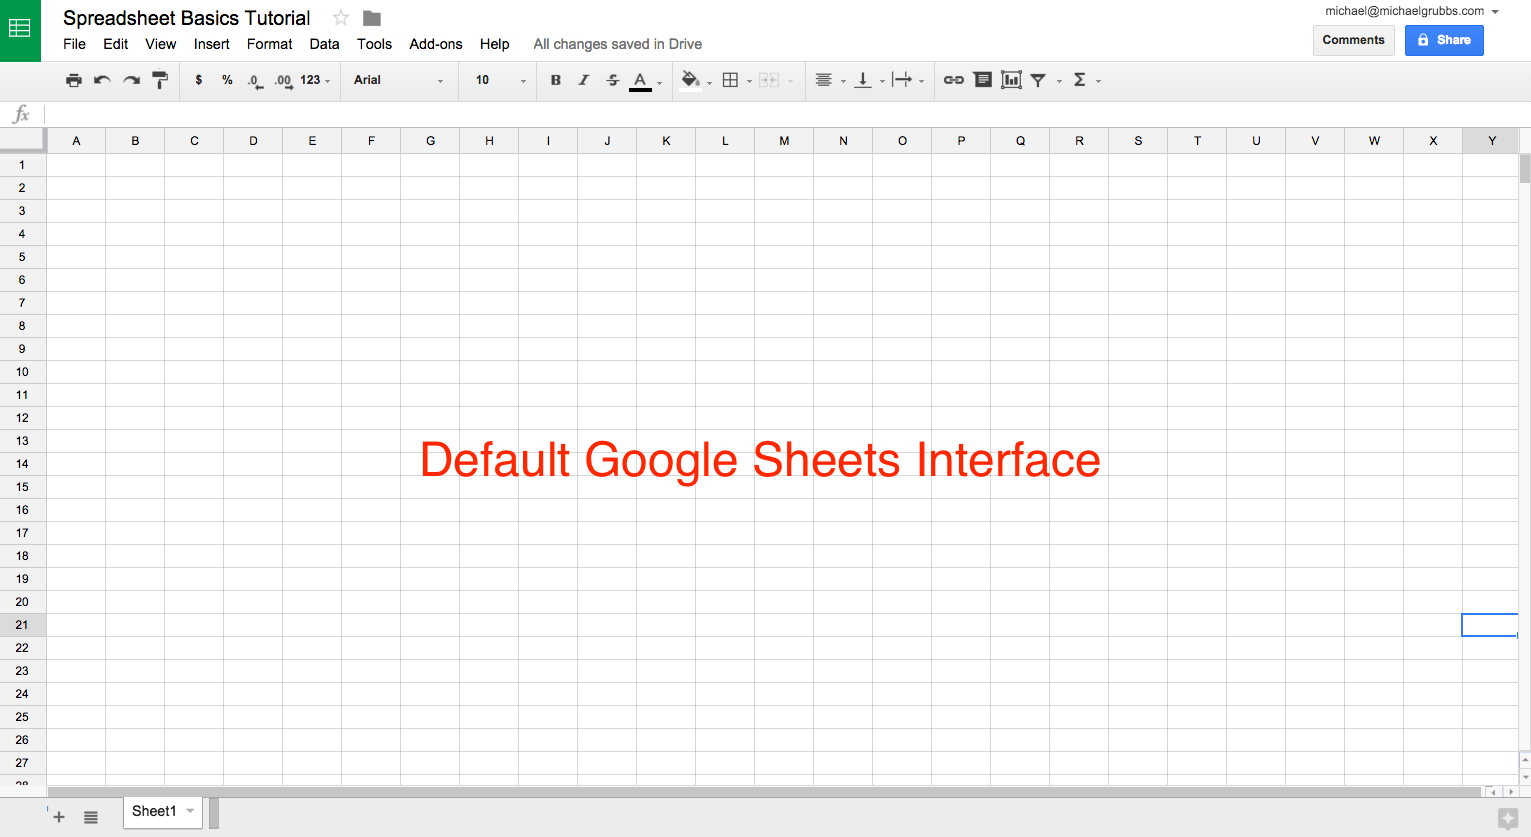 Create My Own Spreadsheet Within Google Sheets 101: The Beginner's Guide To Online Spreadsheets  The